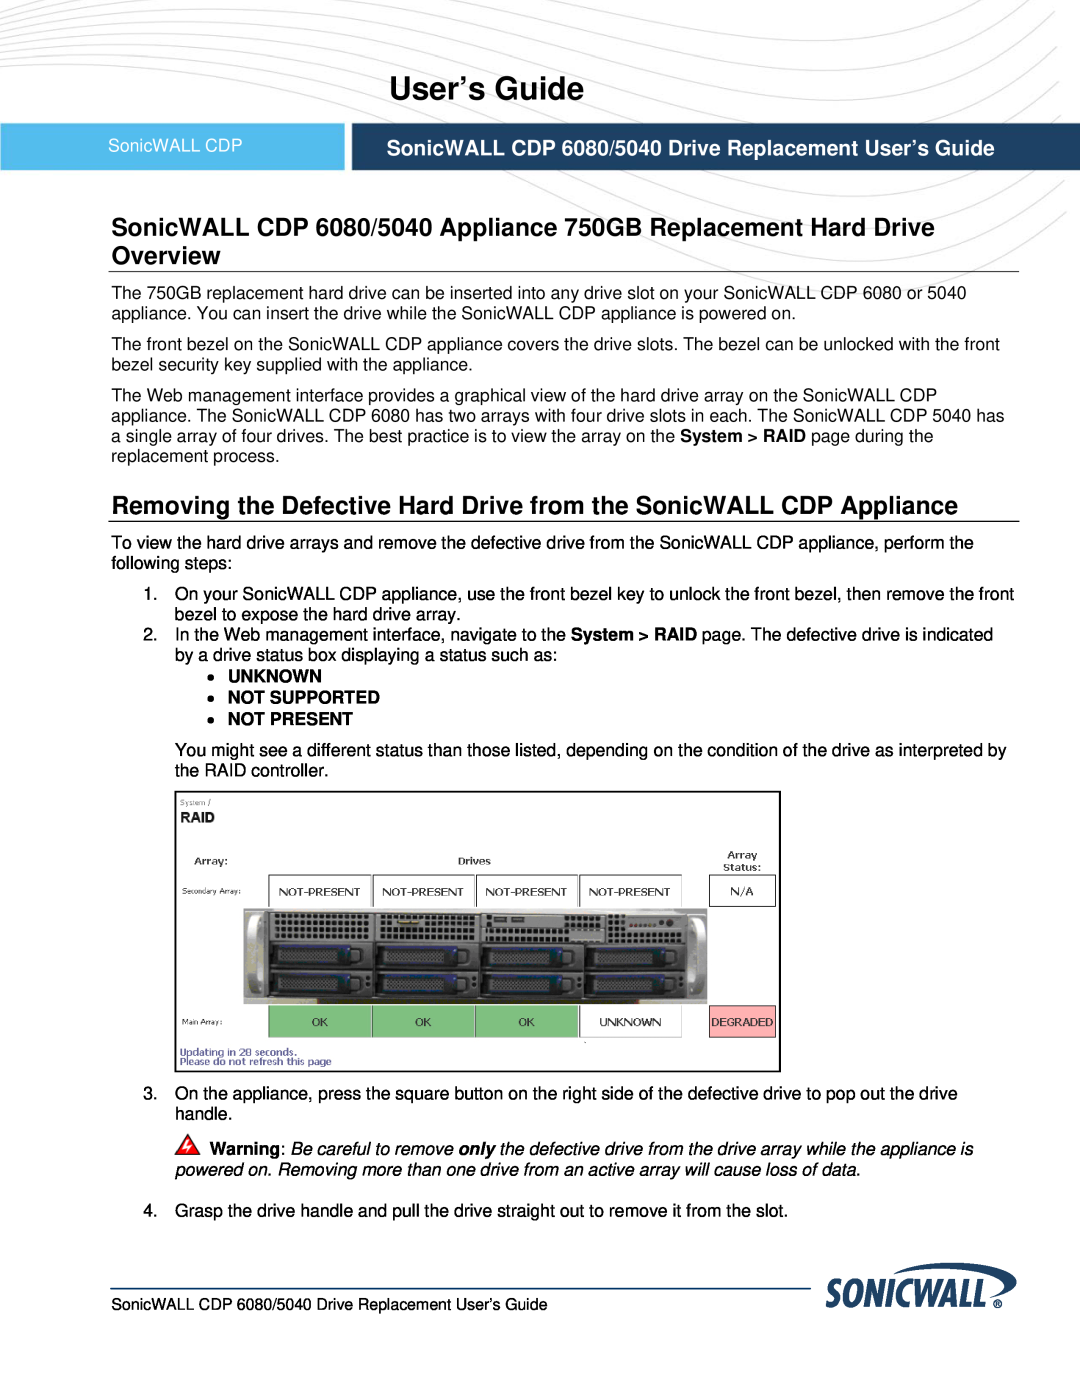 SonicWALL 01-SSC-9310 manual User’s Guide, Removing the Defective Hard Drive from the SonicWALL CDP Appliance 